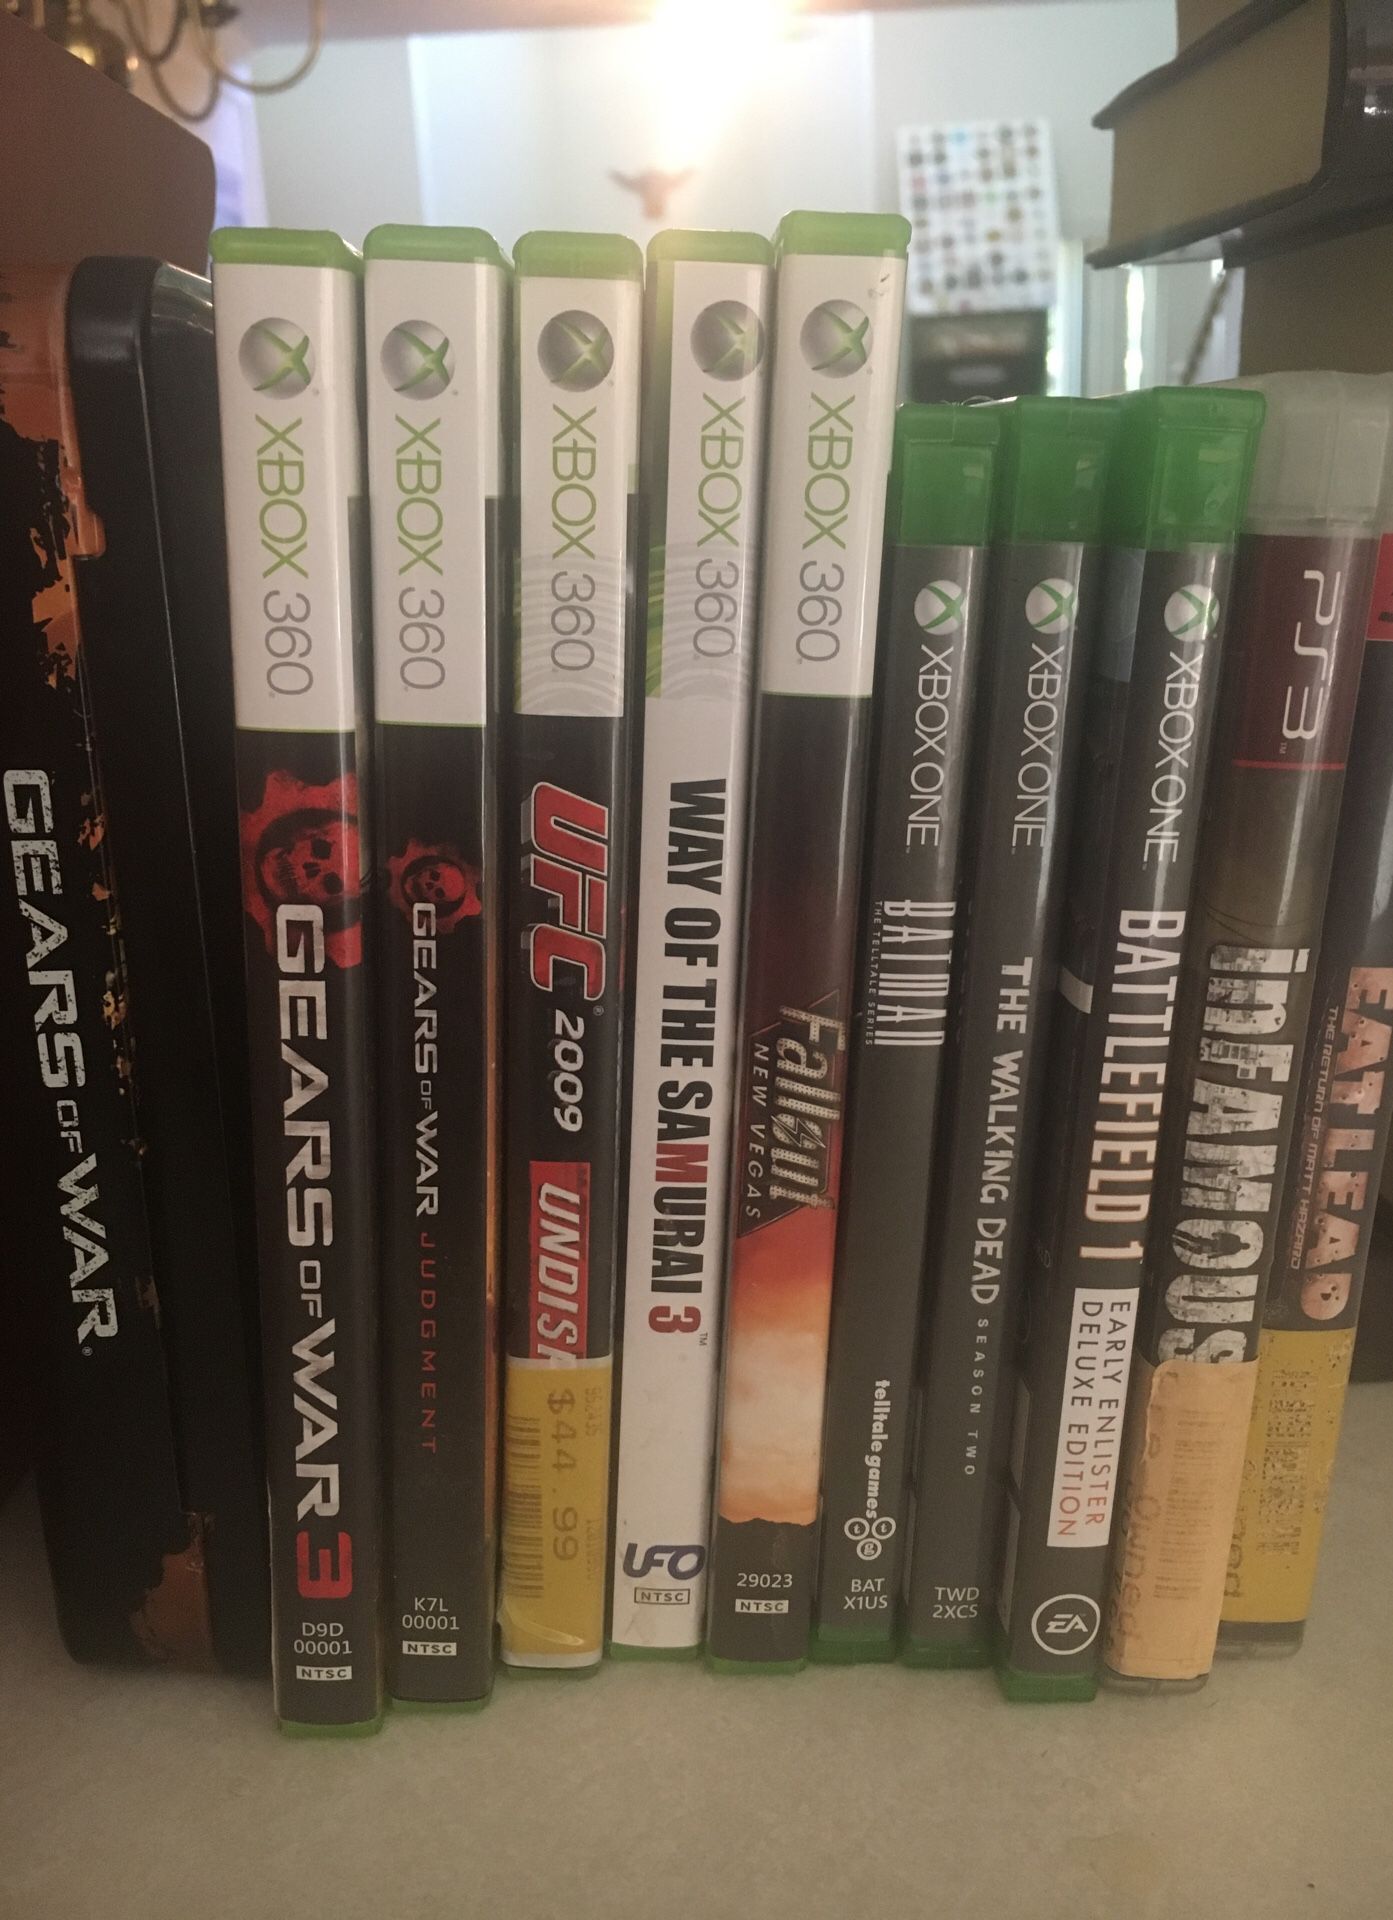 Xbox One, Xbox 360 and PS3 games for sell